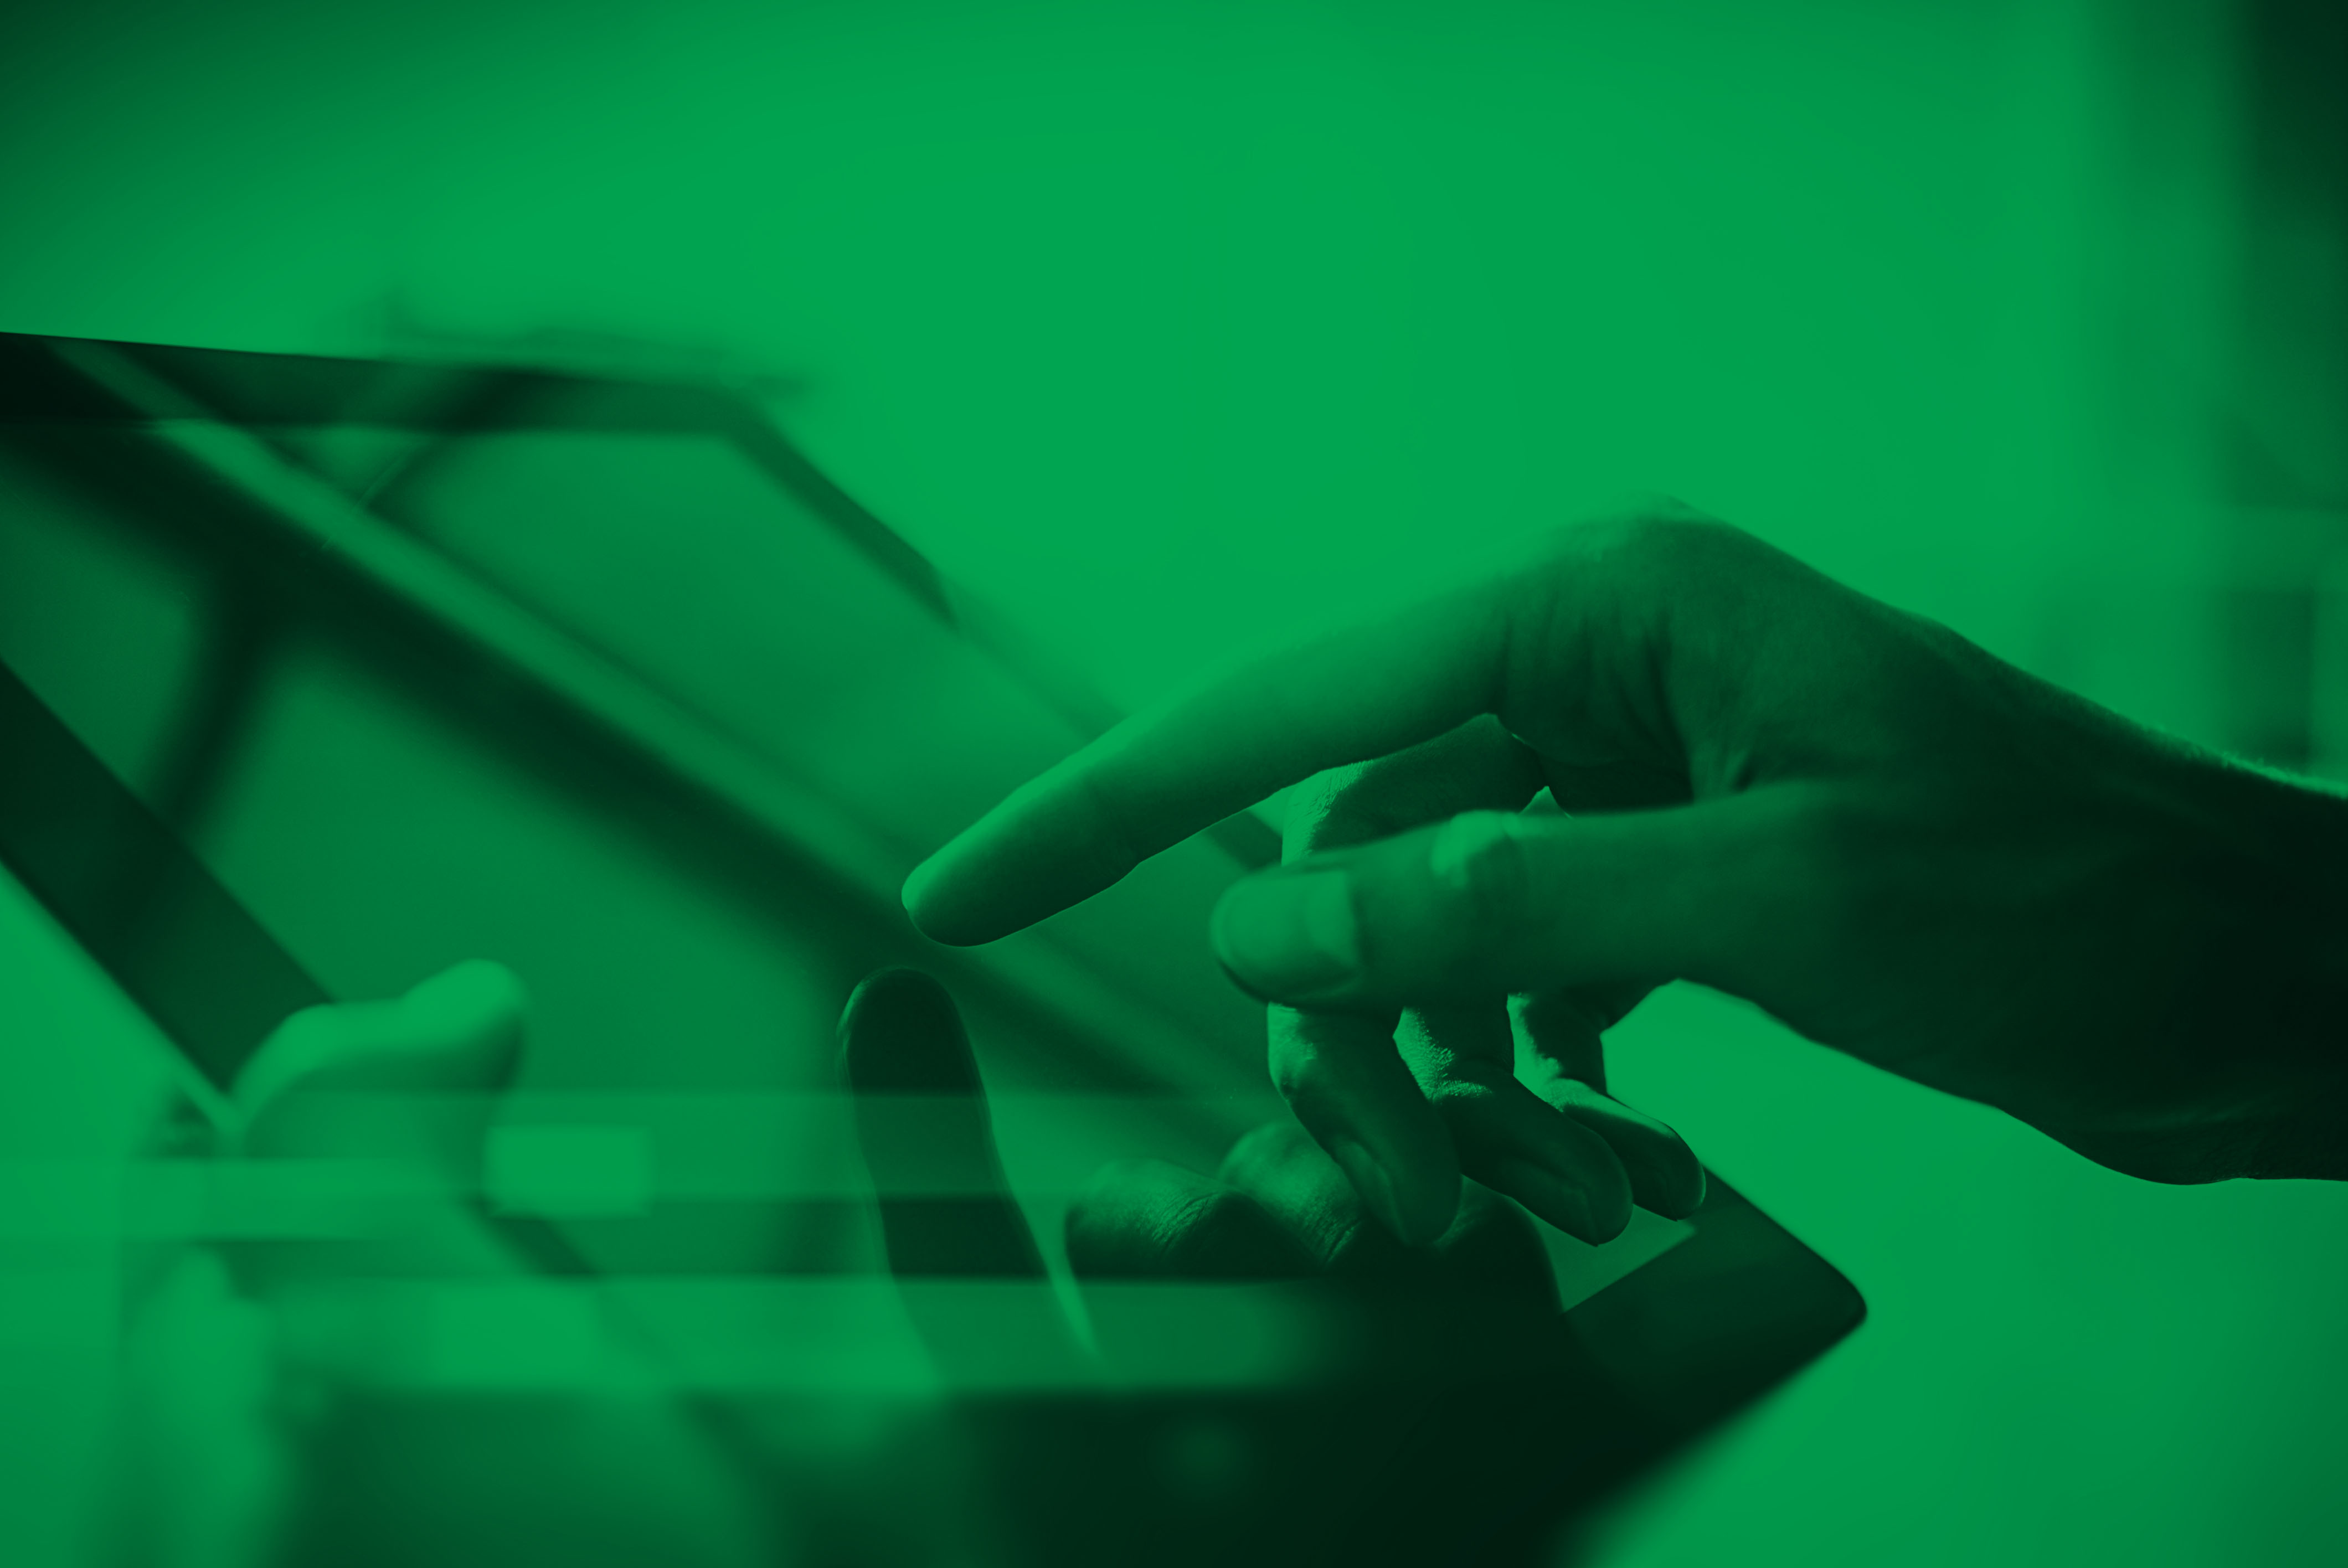 Abstract_Holding Tablet_green.jpg